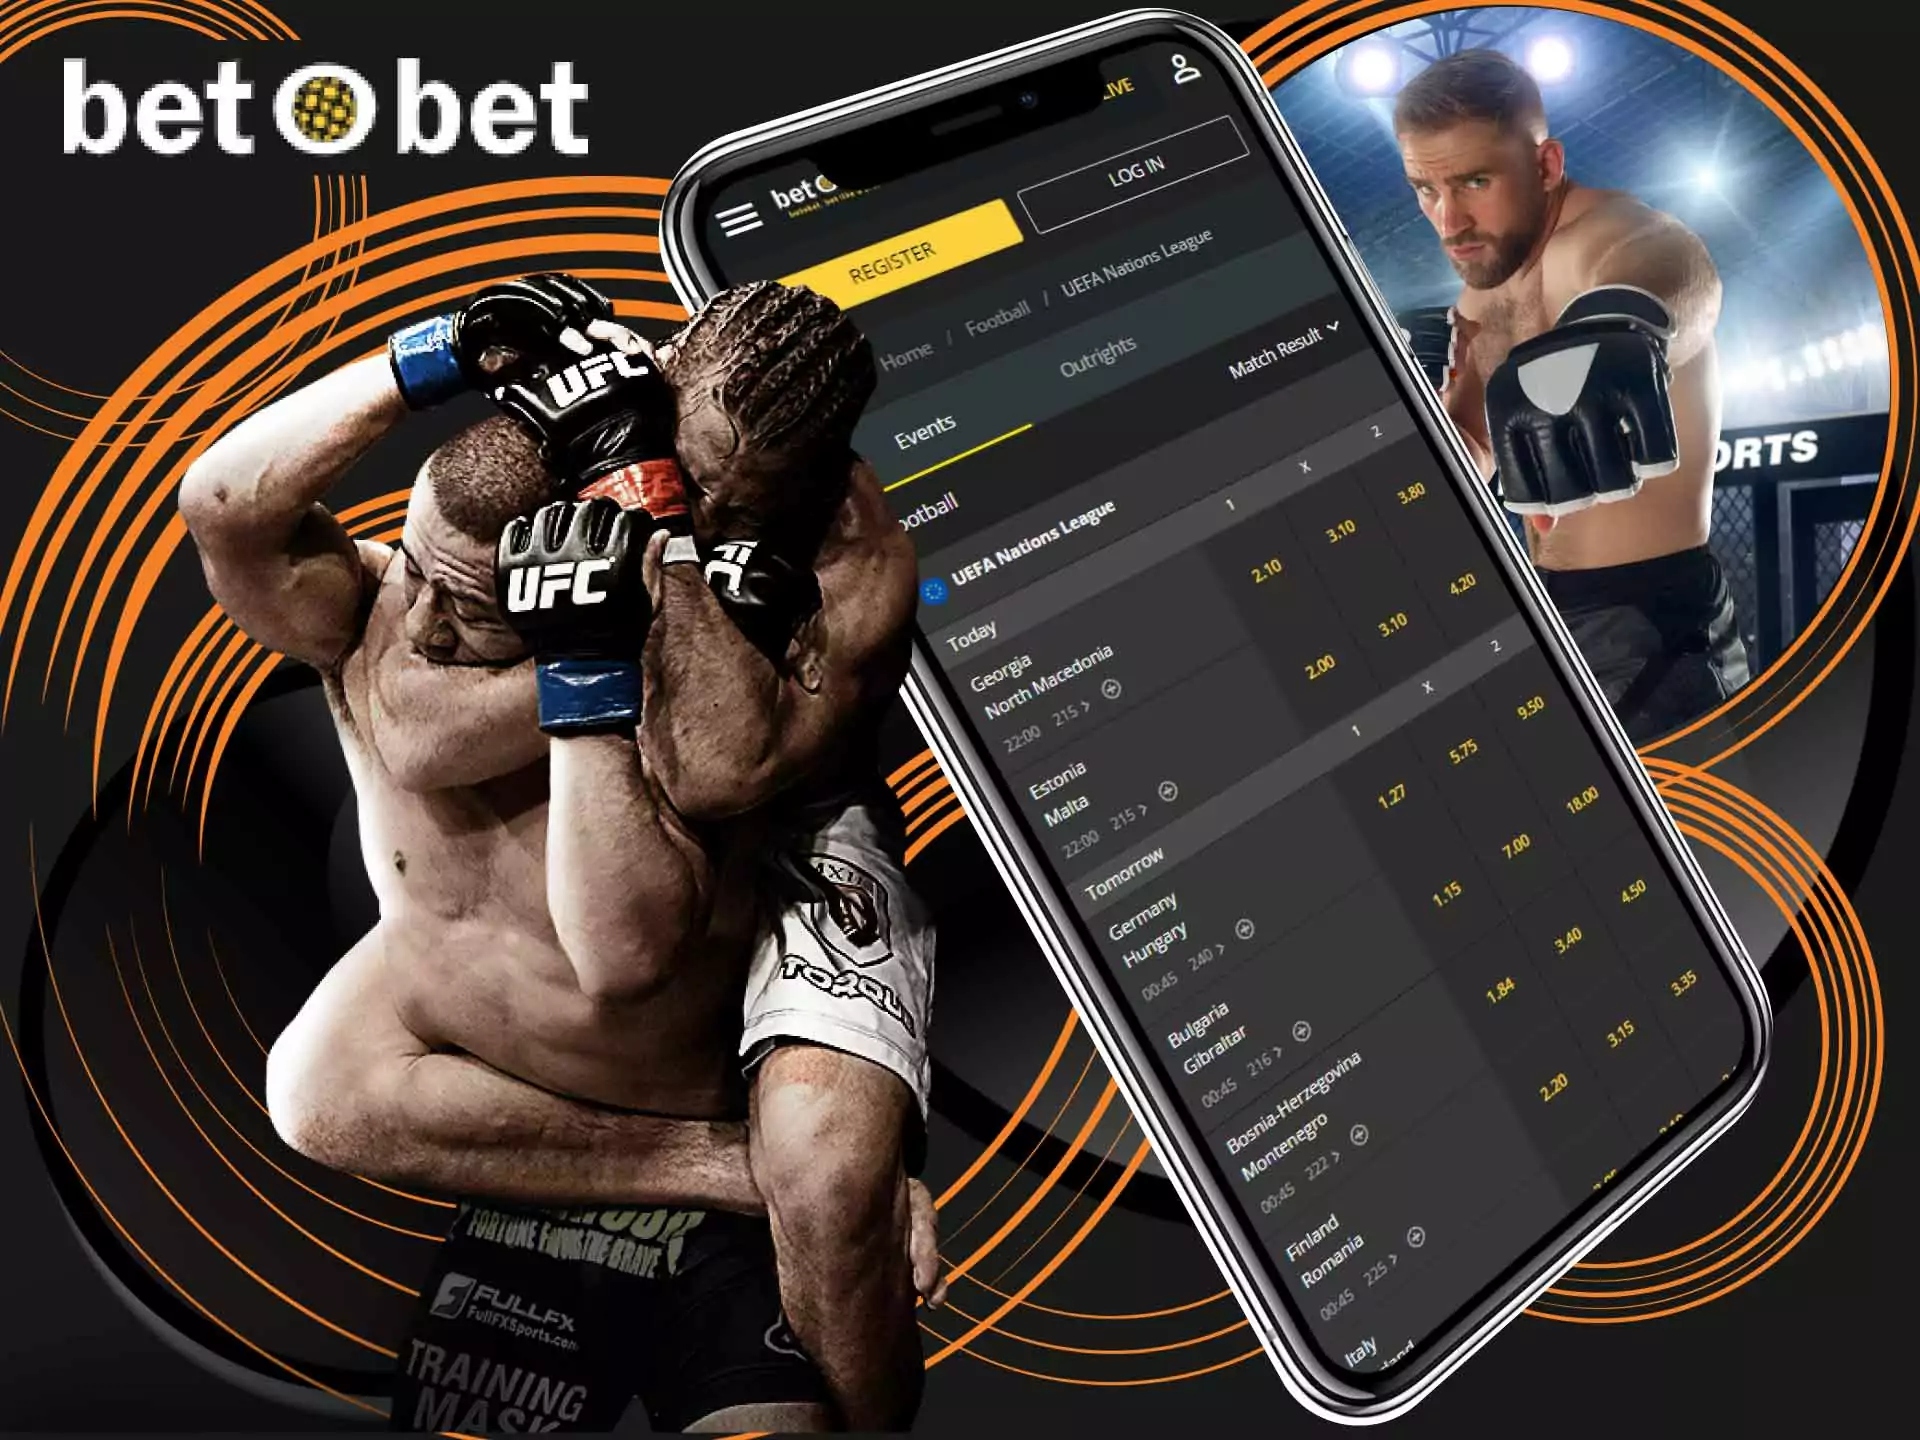 Place a bet on the UFC fighter and win big money at BetOBet.